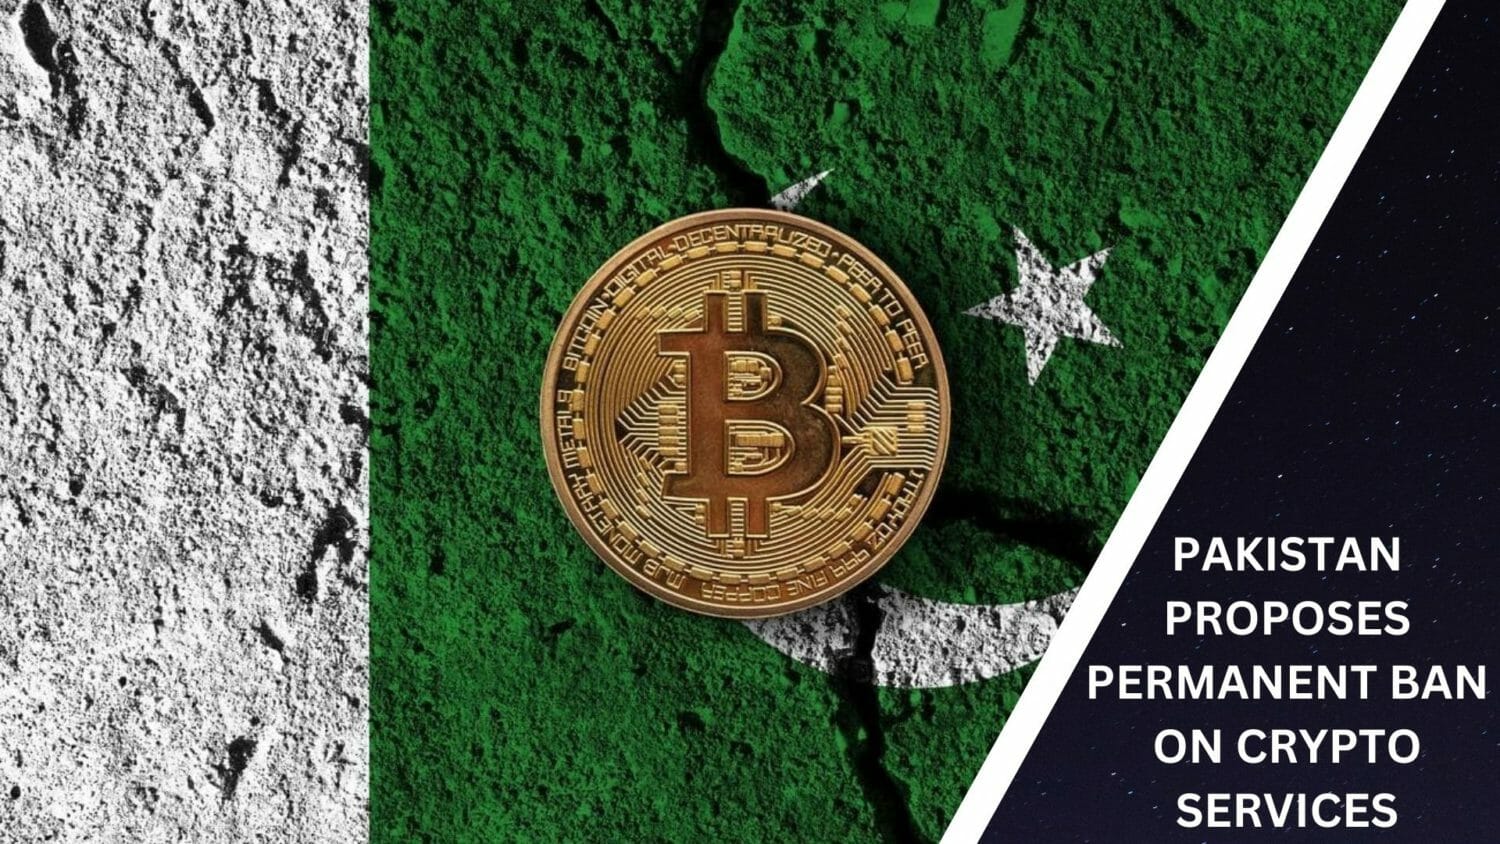 Pakistan Proposes Permanent Ban On Crypto Services